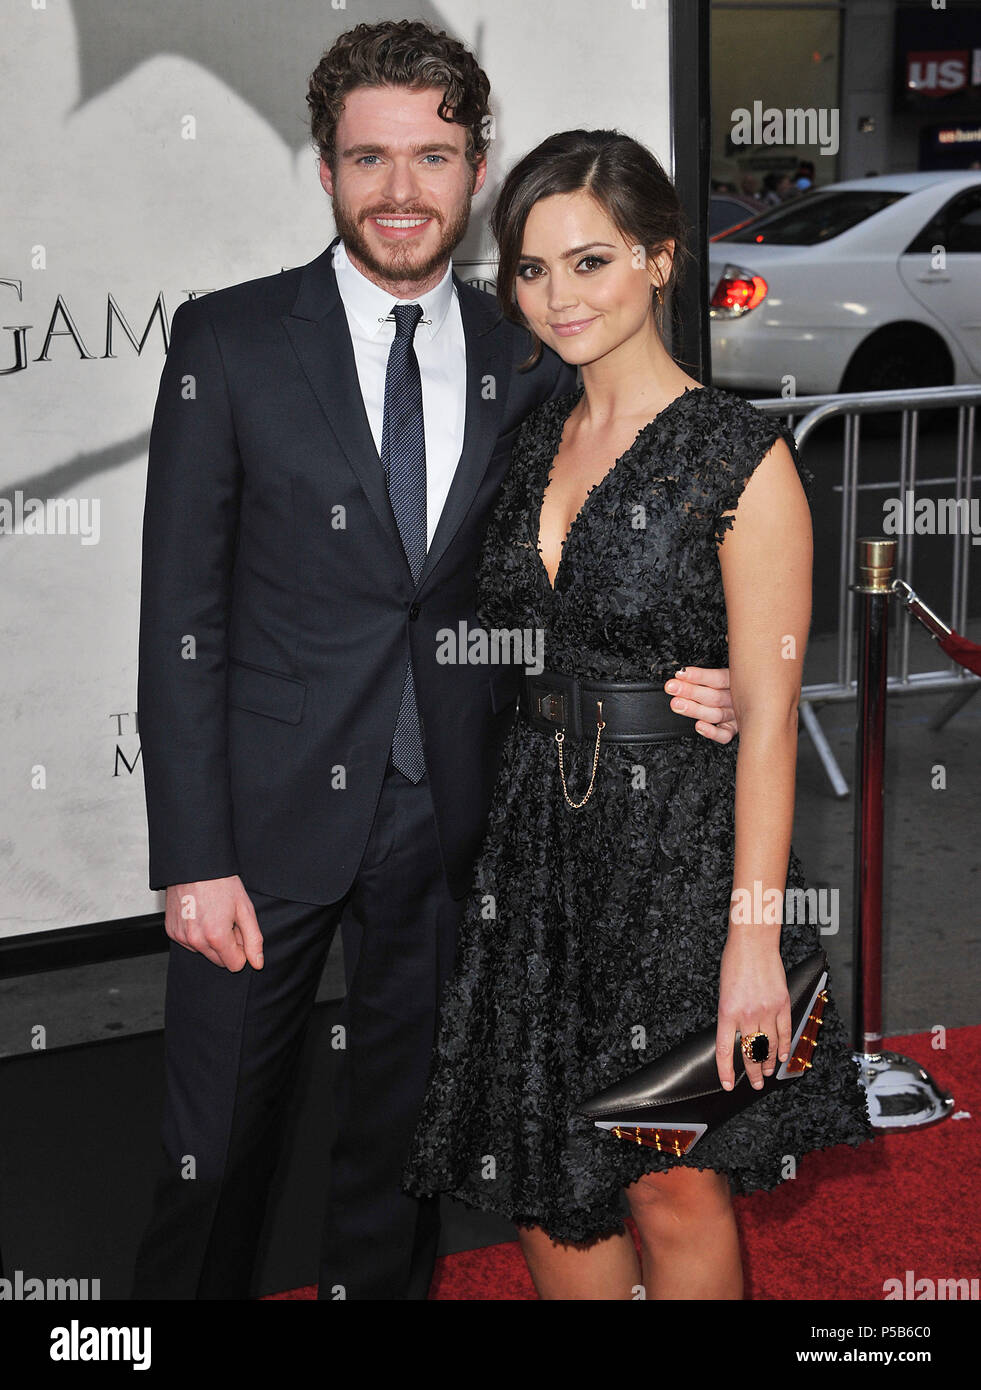 Richard Madden, Jenna-Louise Coleman at the Game Of Thrones Premiere at the Chinese Theatre in Los Angeles.  Richard Madden, Jenna-Louise Coleman ------------- Red Carpet Event, Vertical, USA, Film Industry, Celebrities,  Photography, Bestof, Arts Culture and Entertainment, Topix Celebrities fashion /  Vertical, Best of, Event in Hollywood Life - California,  Red Carpet and backstage, USA, Film Industry, Celebrities,  movie celebrities, TV celebrities, Music celebrities, Photography, Bestof, Arts Culture and Entertainment,  Topix, vertical,  family from from the year , 2013, inquiry tsuni@Gamm Stock Photo